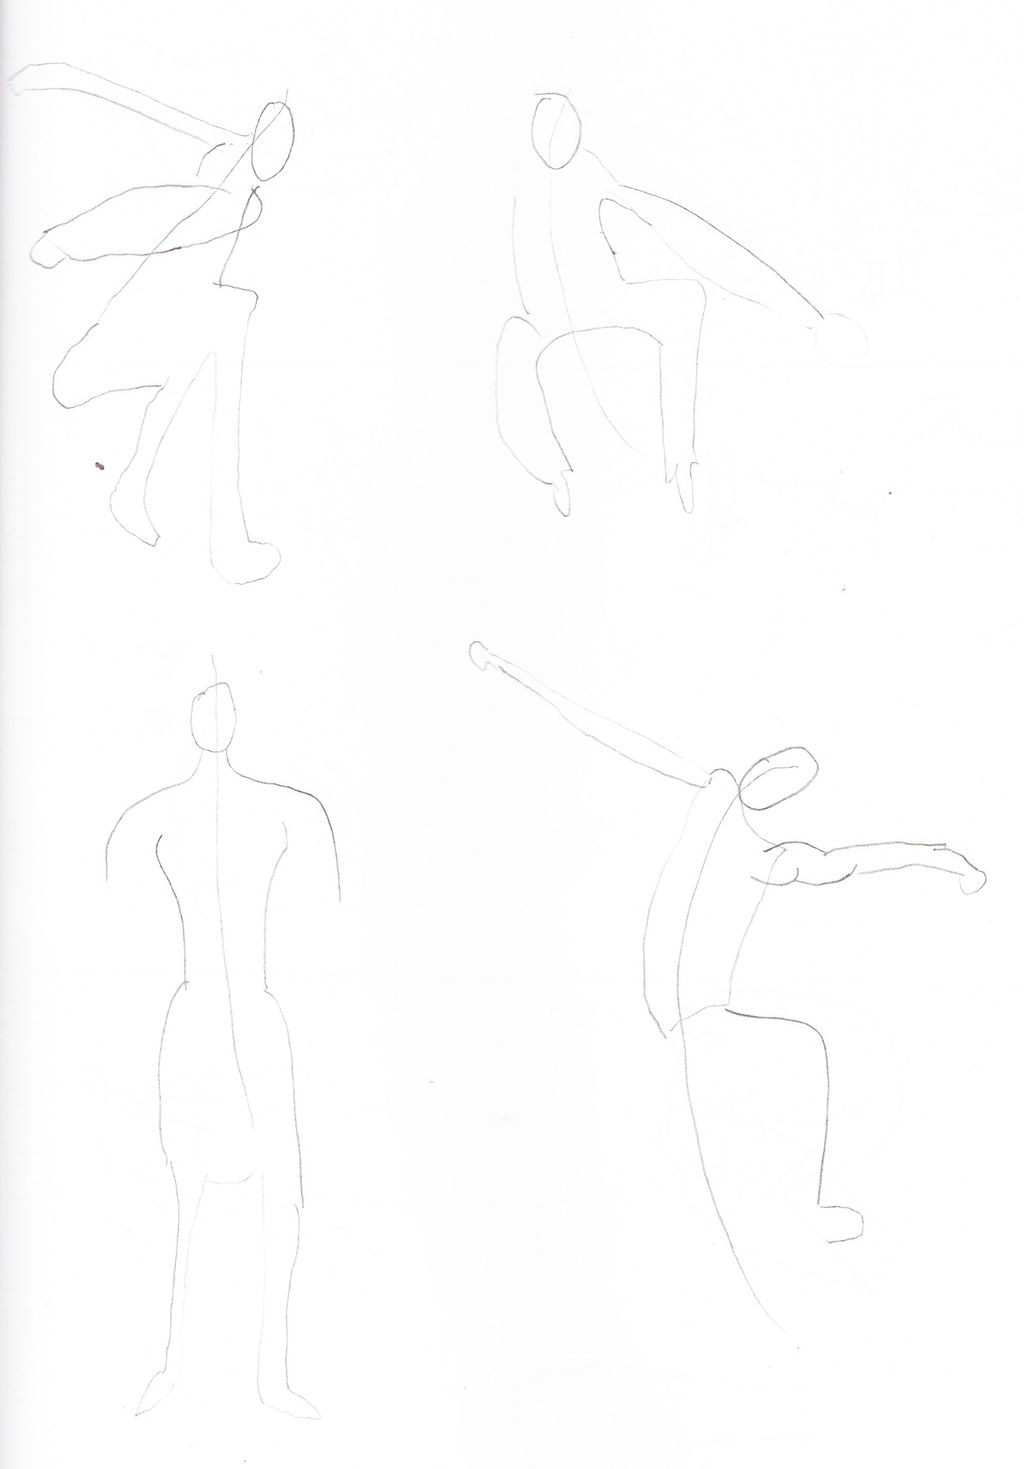 Figures from Proko  - Day 325 - Learning to Draw